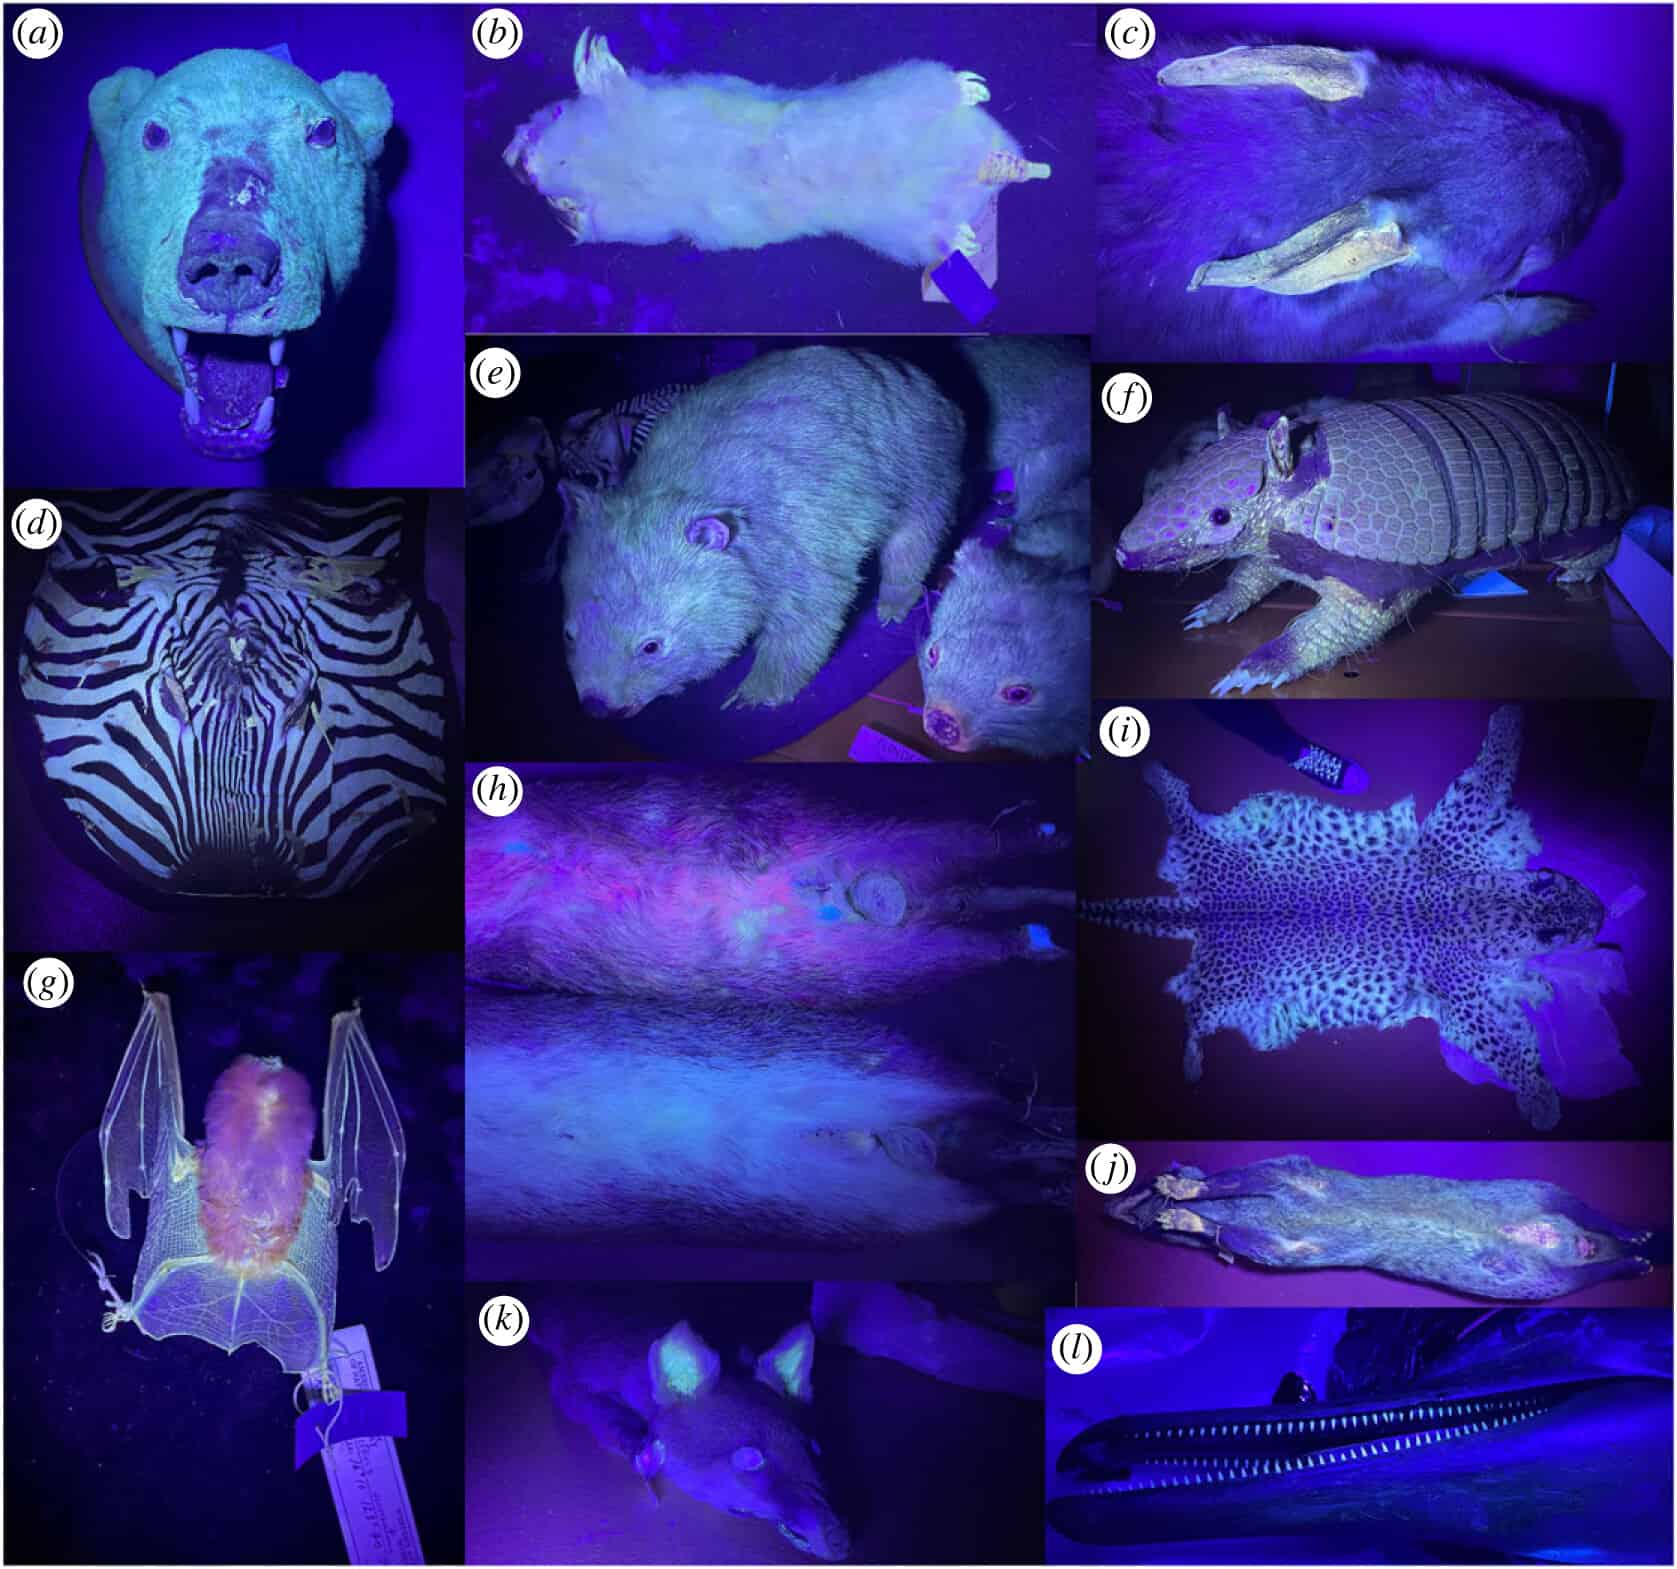 Fluorescent mammals are more common than we thought – even cats do it